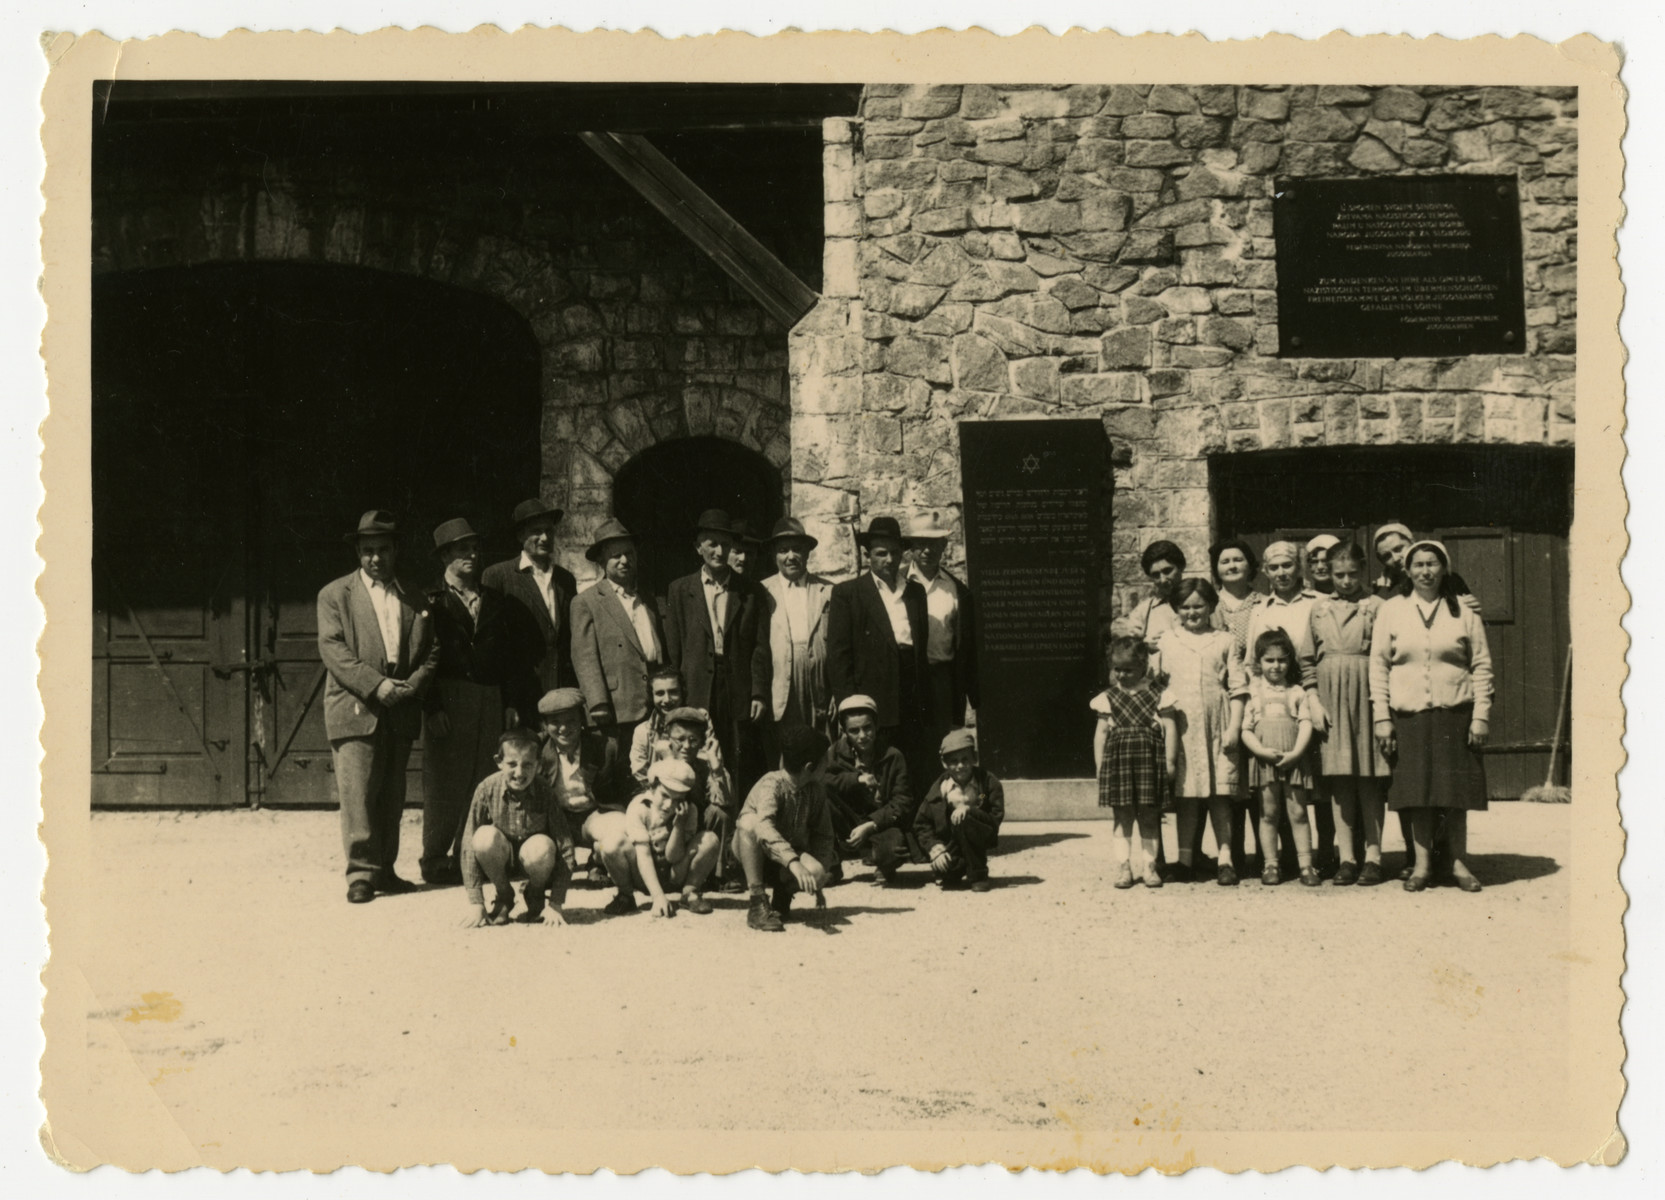 A group of Orthodox Jewish Holocaust survivors and their children visit the Mauthausen concentration camp.

They had fled to Austria from Hungary after the 1956 revolution and were living in Asten, Austria, which is between Linz and Mauthausen.